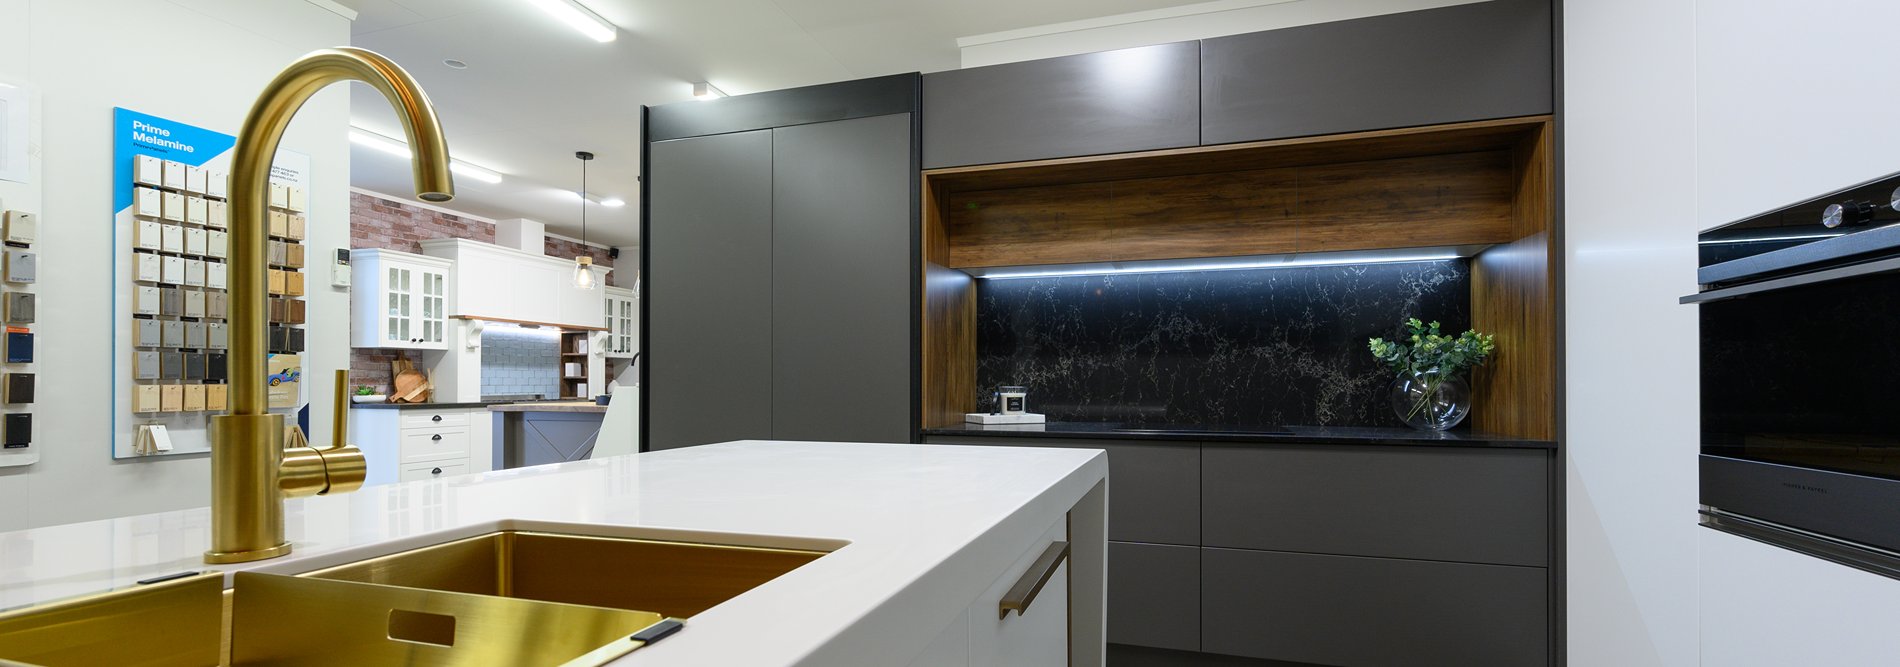 Kitchen showroom with white counter top and black cabinets